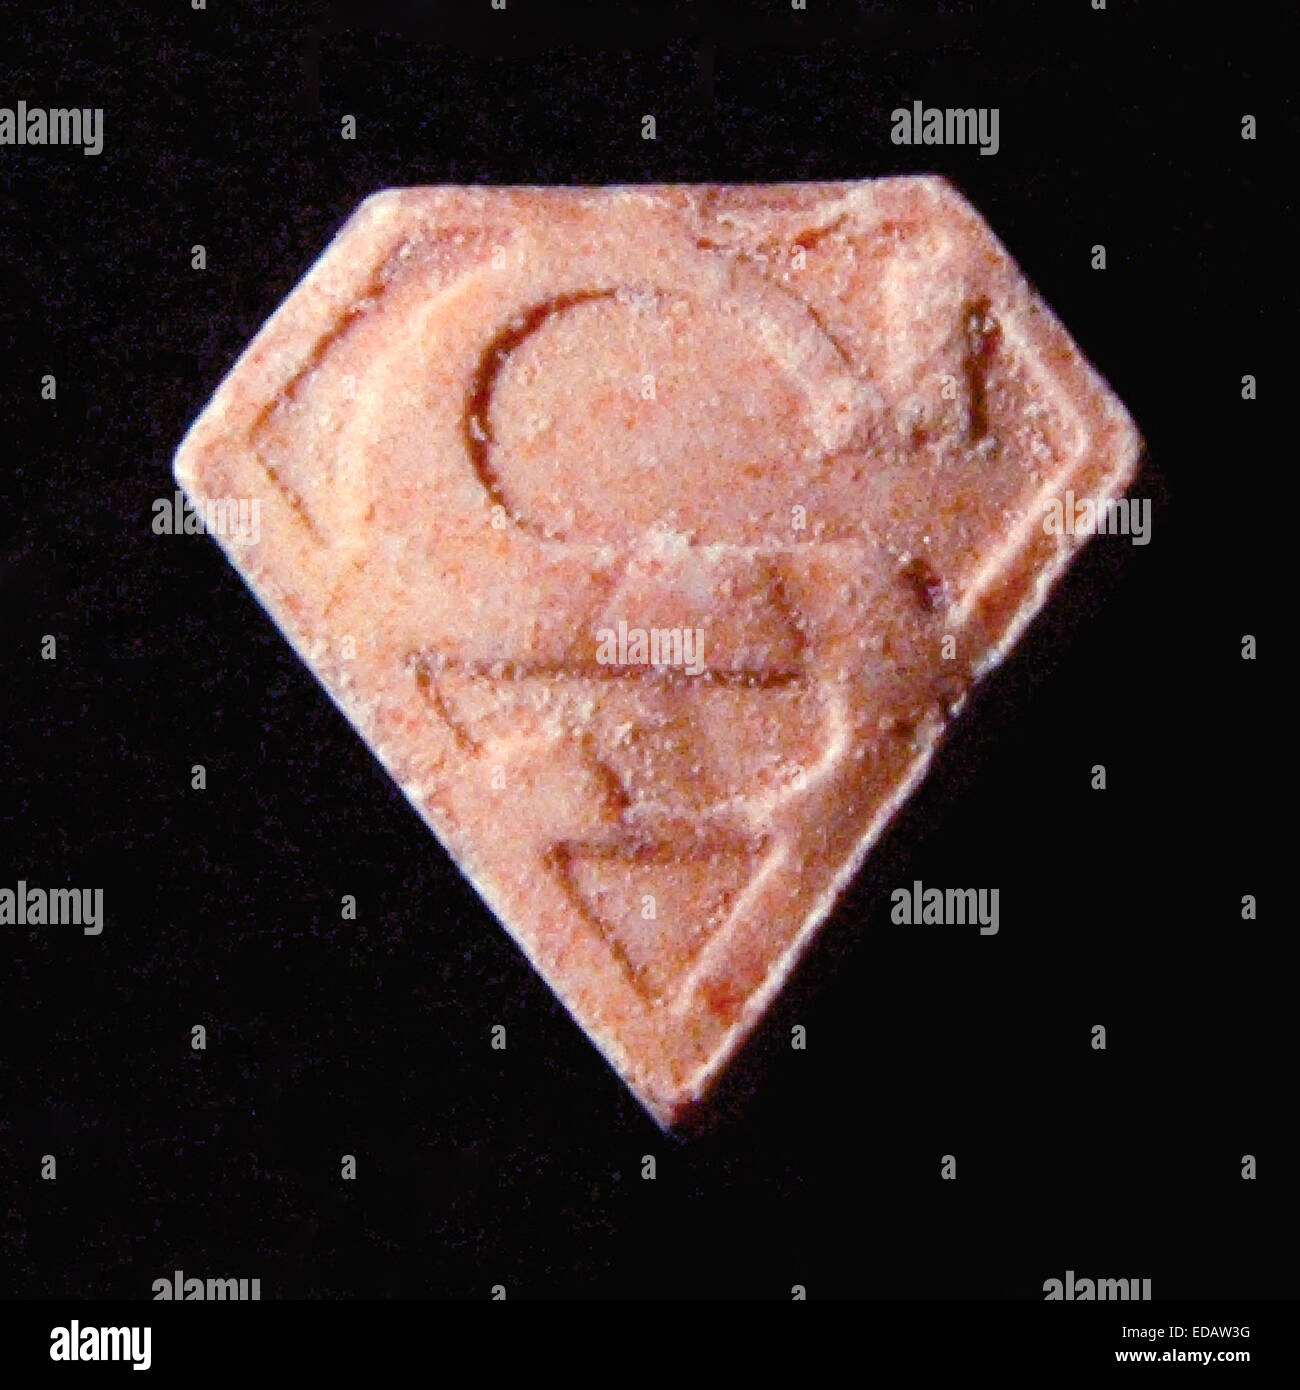 Fake Ecstasy pill know as a 'Pink Superman' containing PMA responsible for at least 4 deaths. This tablet would contain upwards of 173 mg of PMA, doses as low as 60 mg can cause significant and alarming increase in blood pressure, body temperature and pulse. High doses may cause vomiting, heart failure, kidney failure, brain seizures, hallucinations, sudden collapse, and an extreme rise in body temperature, up to 115°F (46°C).  See description for more information. Stock Photo